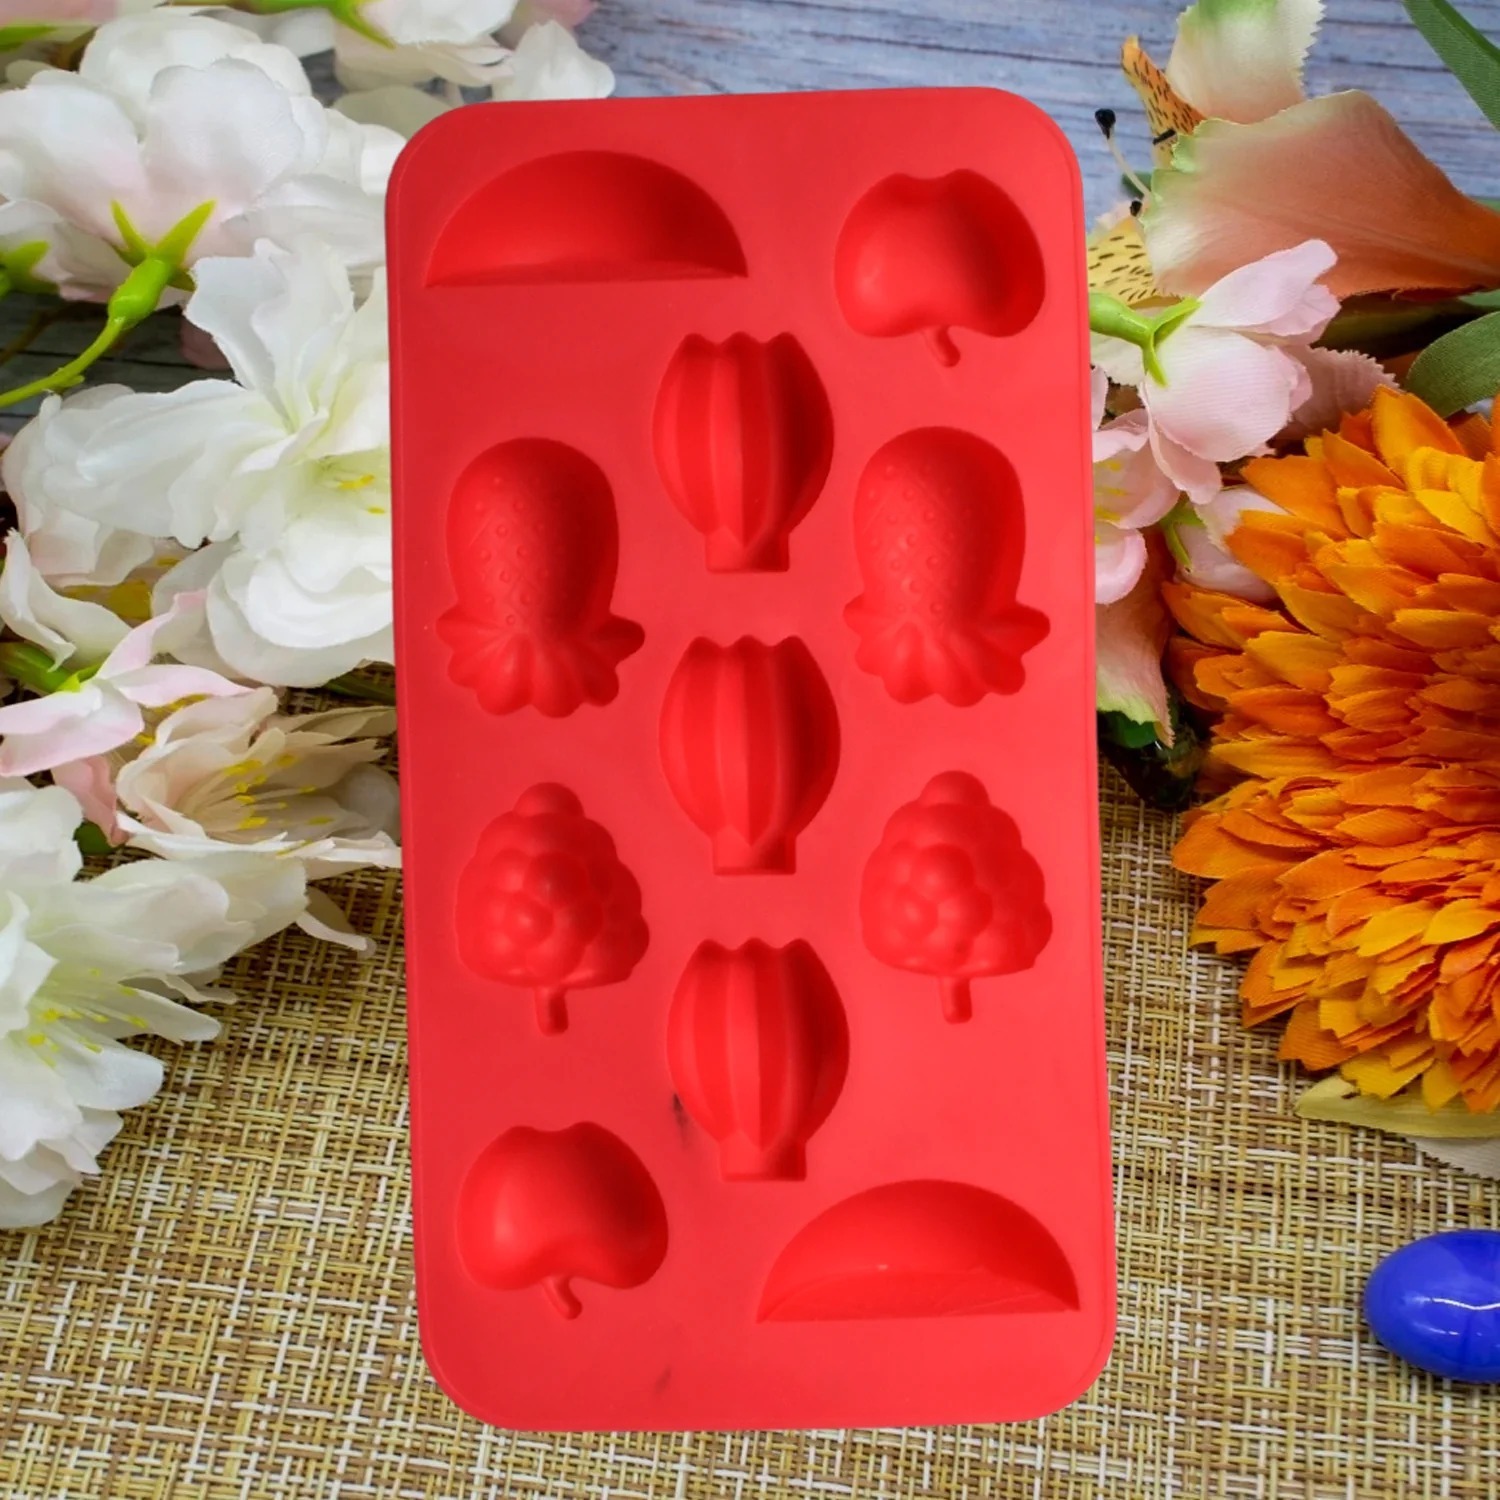 ICE CUBE MOLD SILICONE